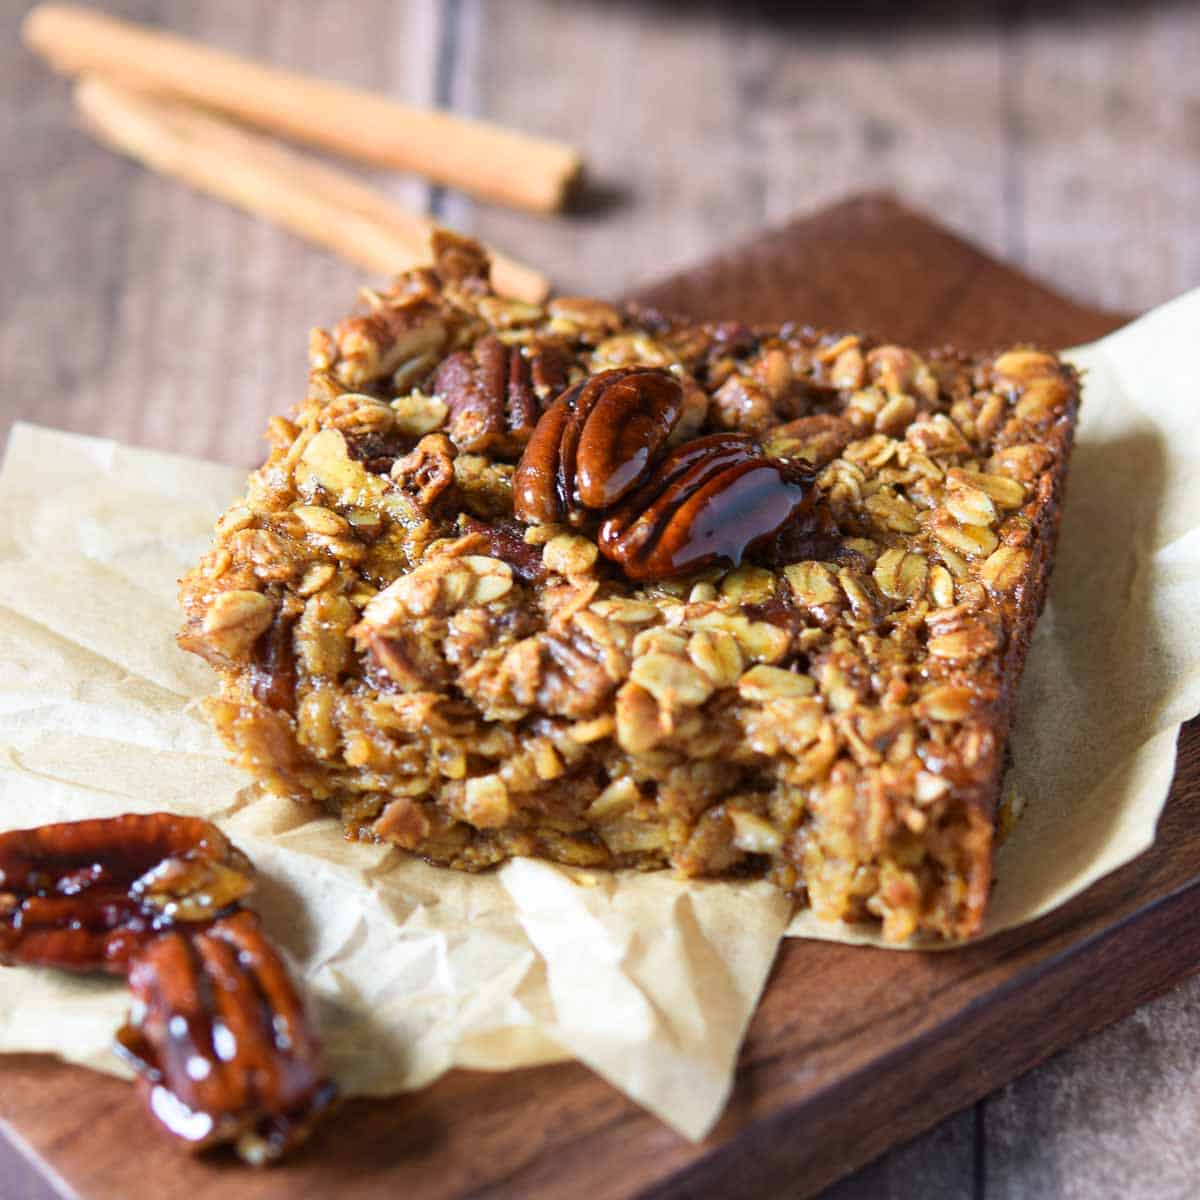 Slice of baked oatmeal with pecans on top with a brown background.